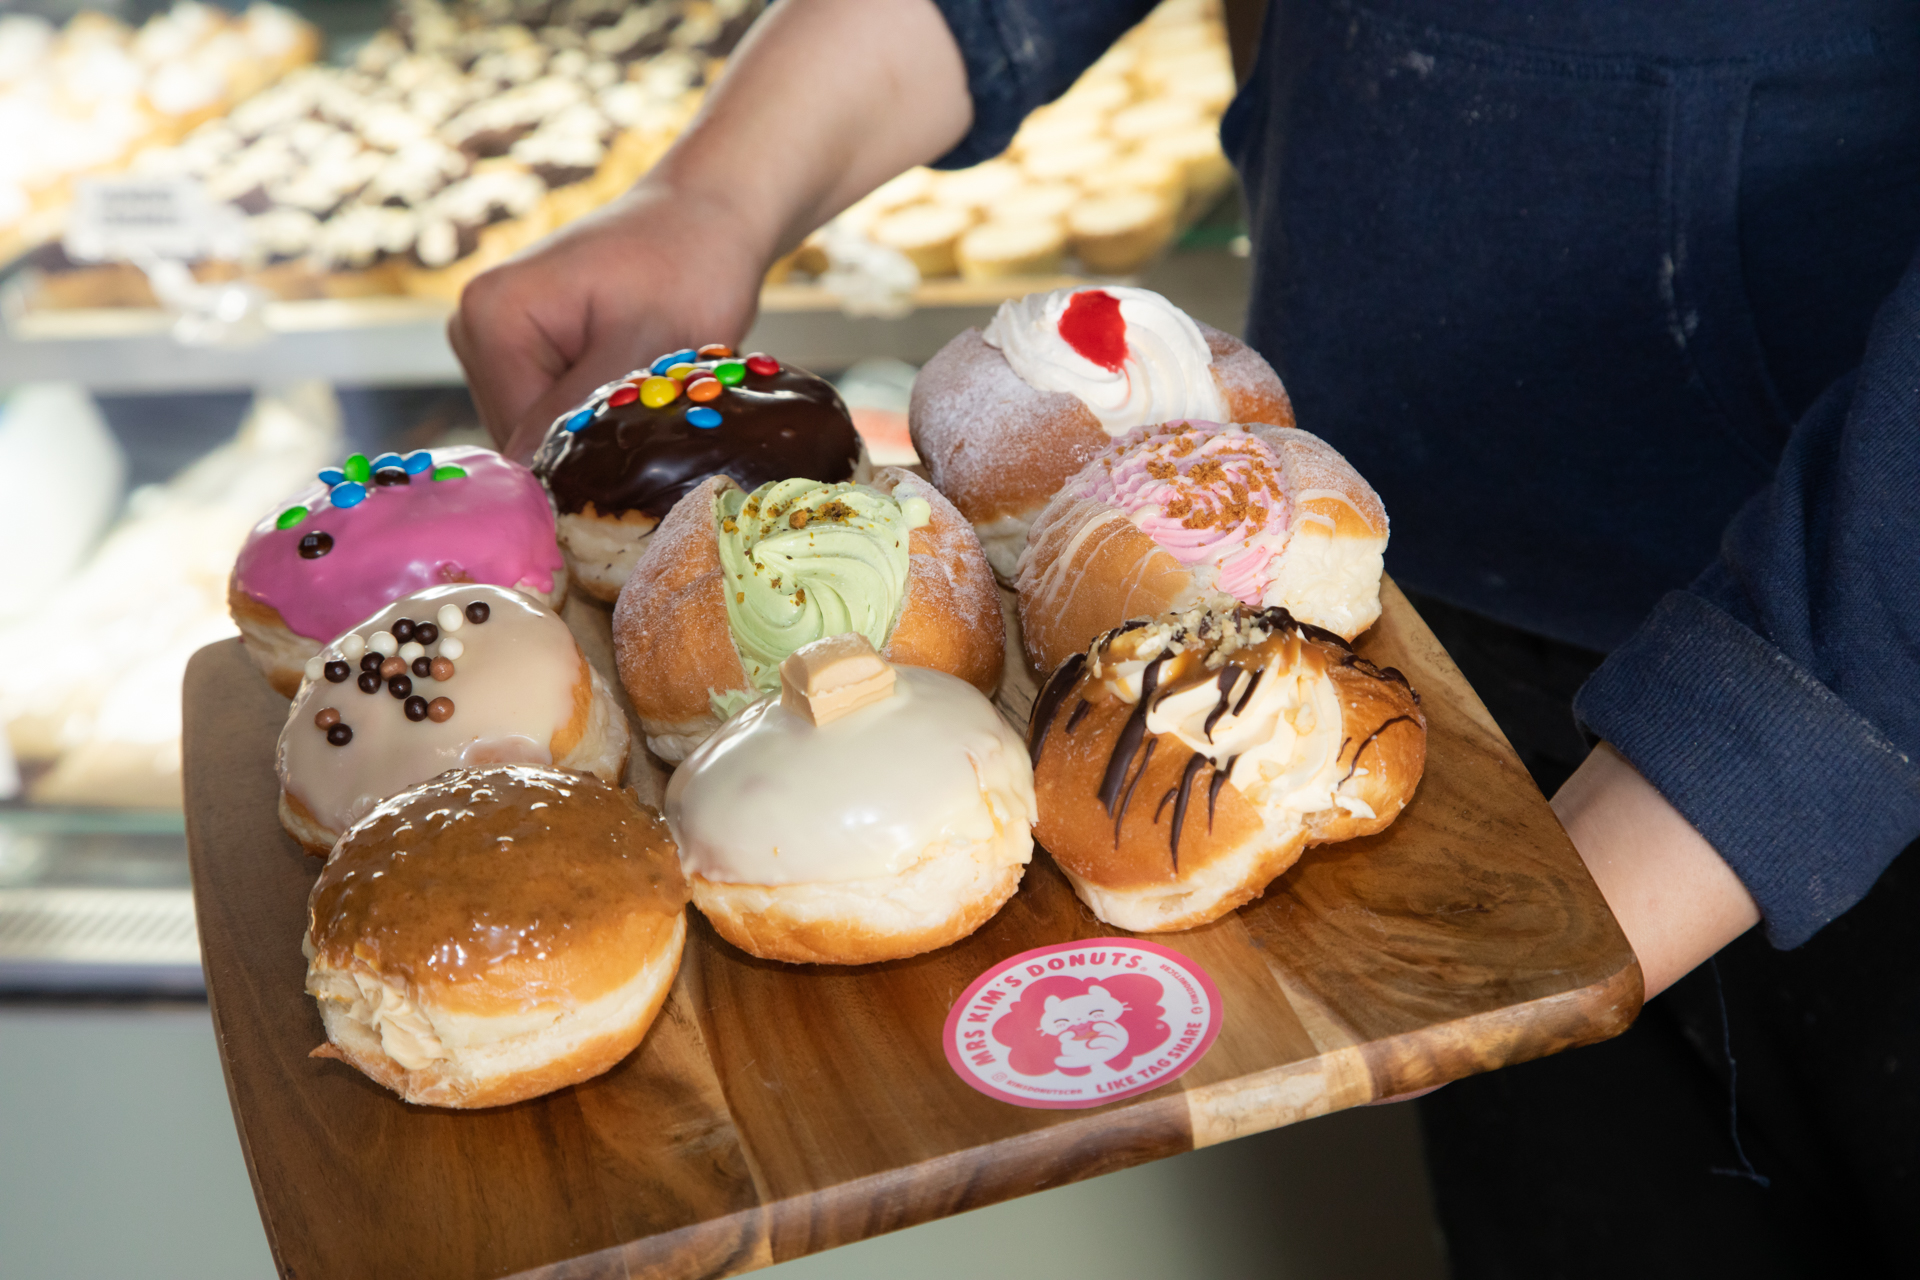 Hot in the City: Doughnut worry, be happy because Mrs Kim’s Donuts have opened in Kingston